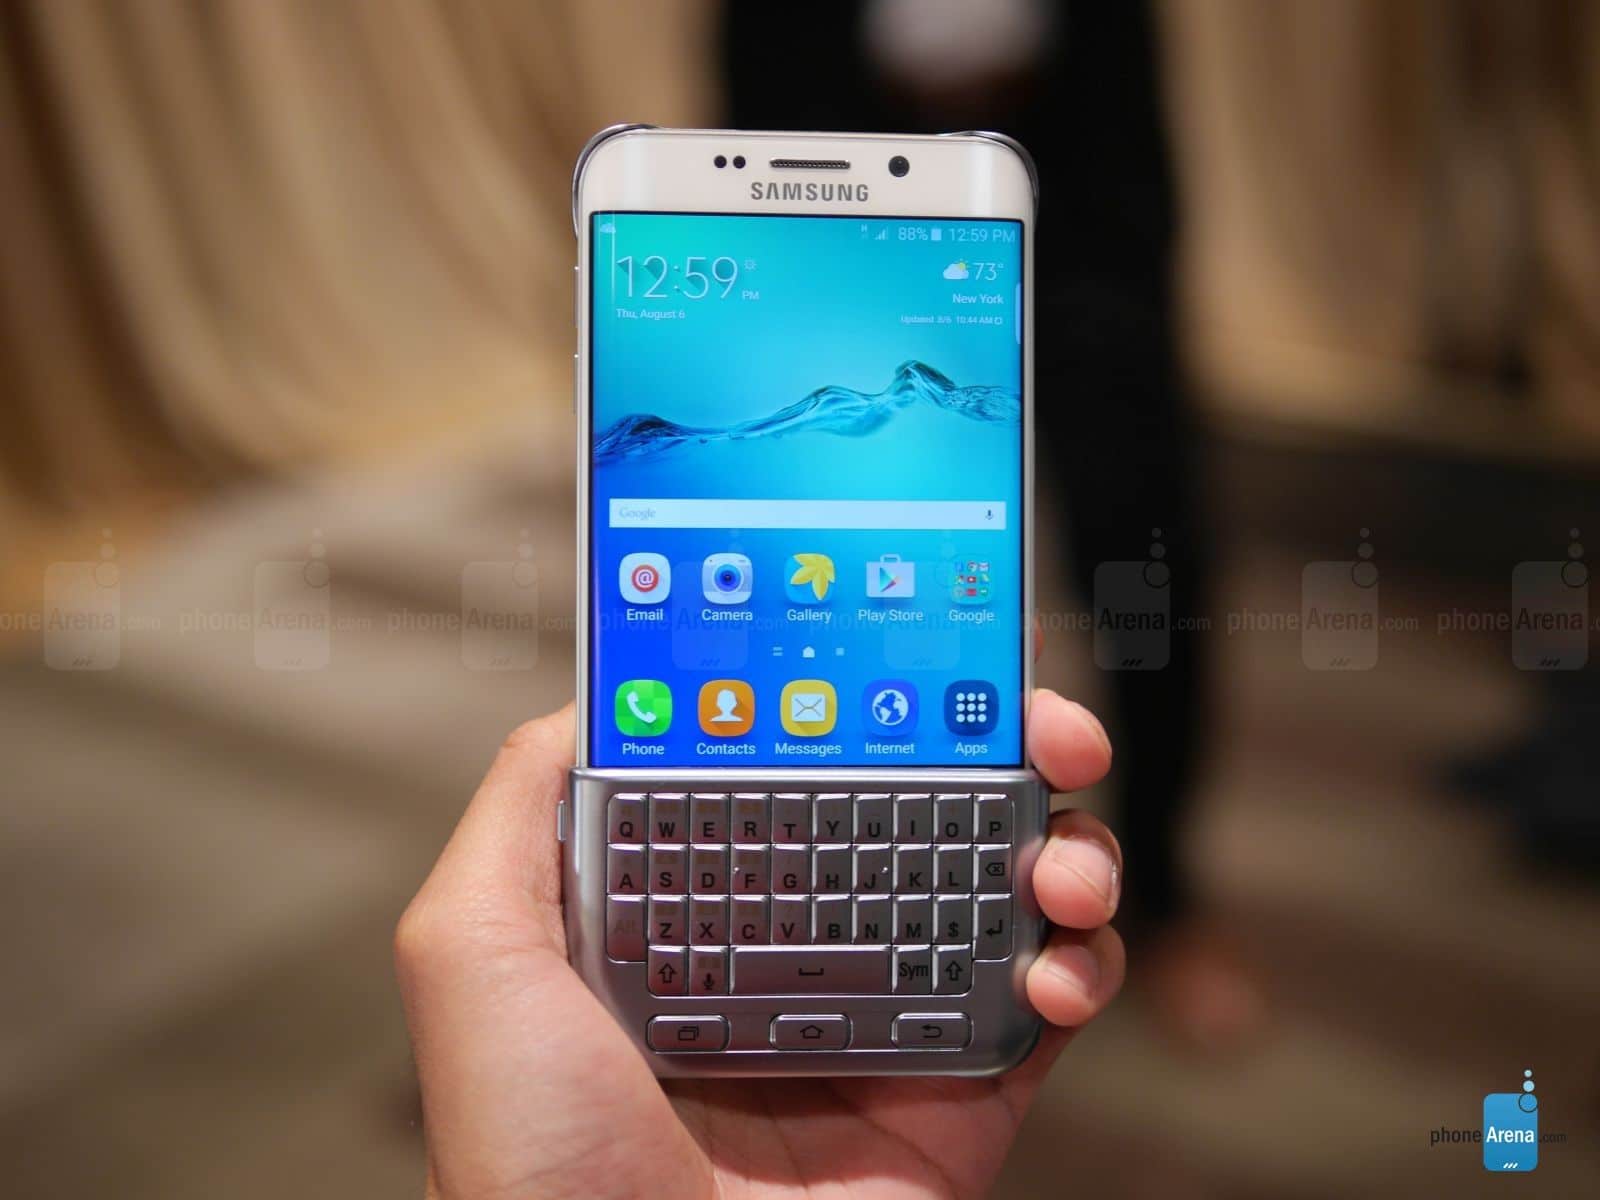 Samsung-Keyboard-Cover-for-the-Galaxy-S6-edge-hands-on